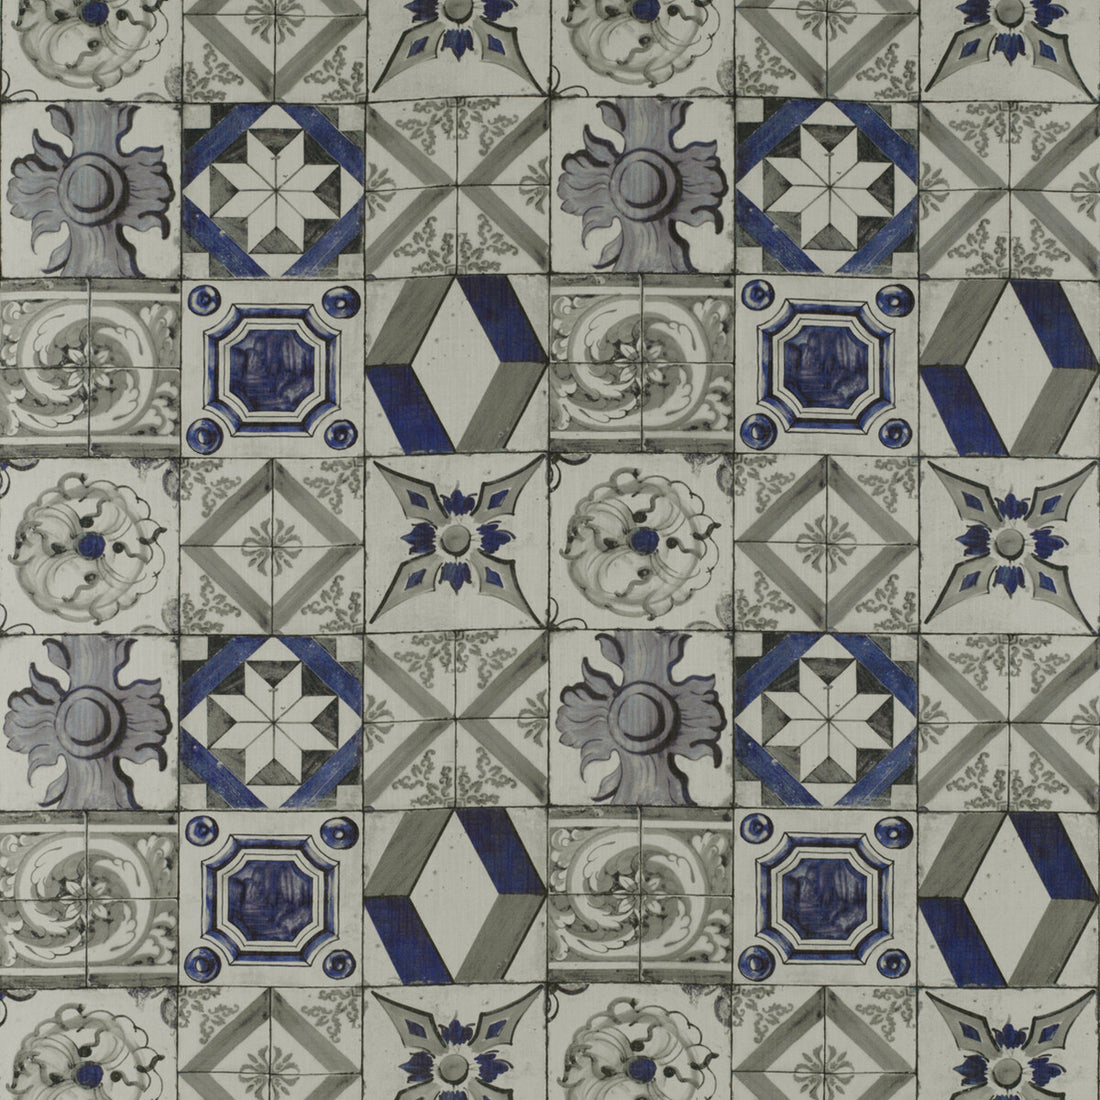 Trastevere fabric in azul/gris color - pattern GDT5332.004.0 - by Gaston y Daniela in the Tierras collection